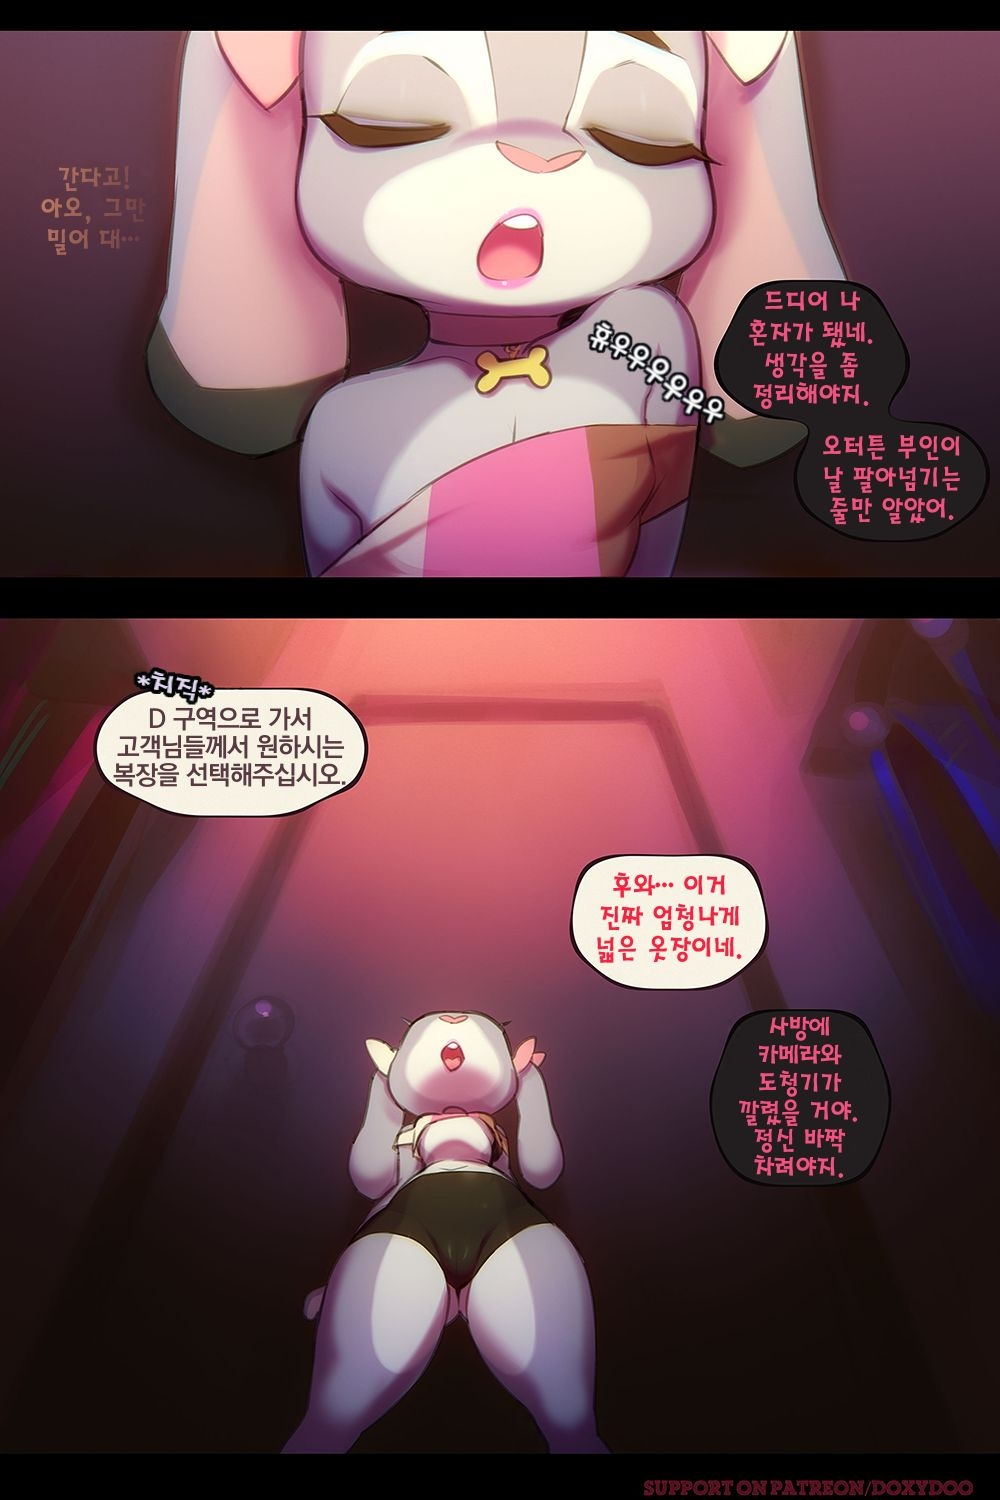 [Doxy] Sweet Sting Part 2: Down The Rabbit Hole | 달콤한 함정수사 2부: 토끼 굴속으로 (Zootopia) [Korean] [Ongoing] 20